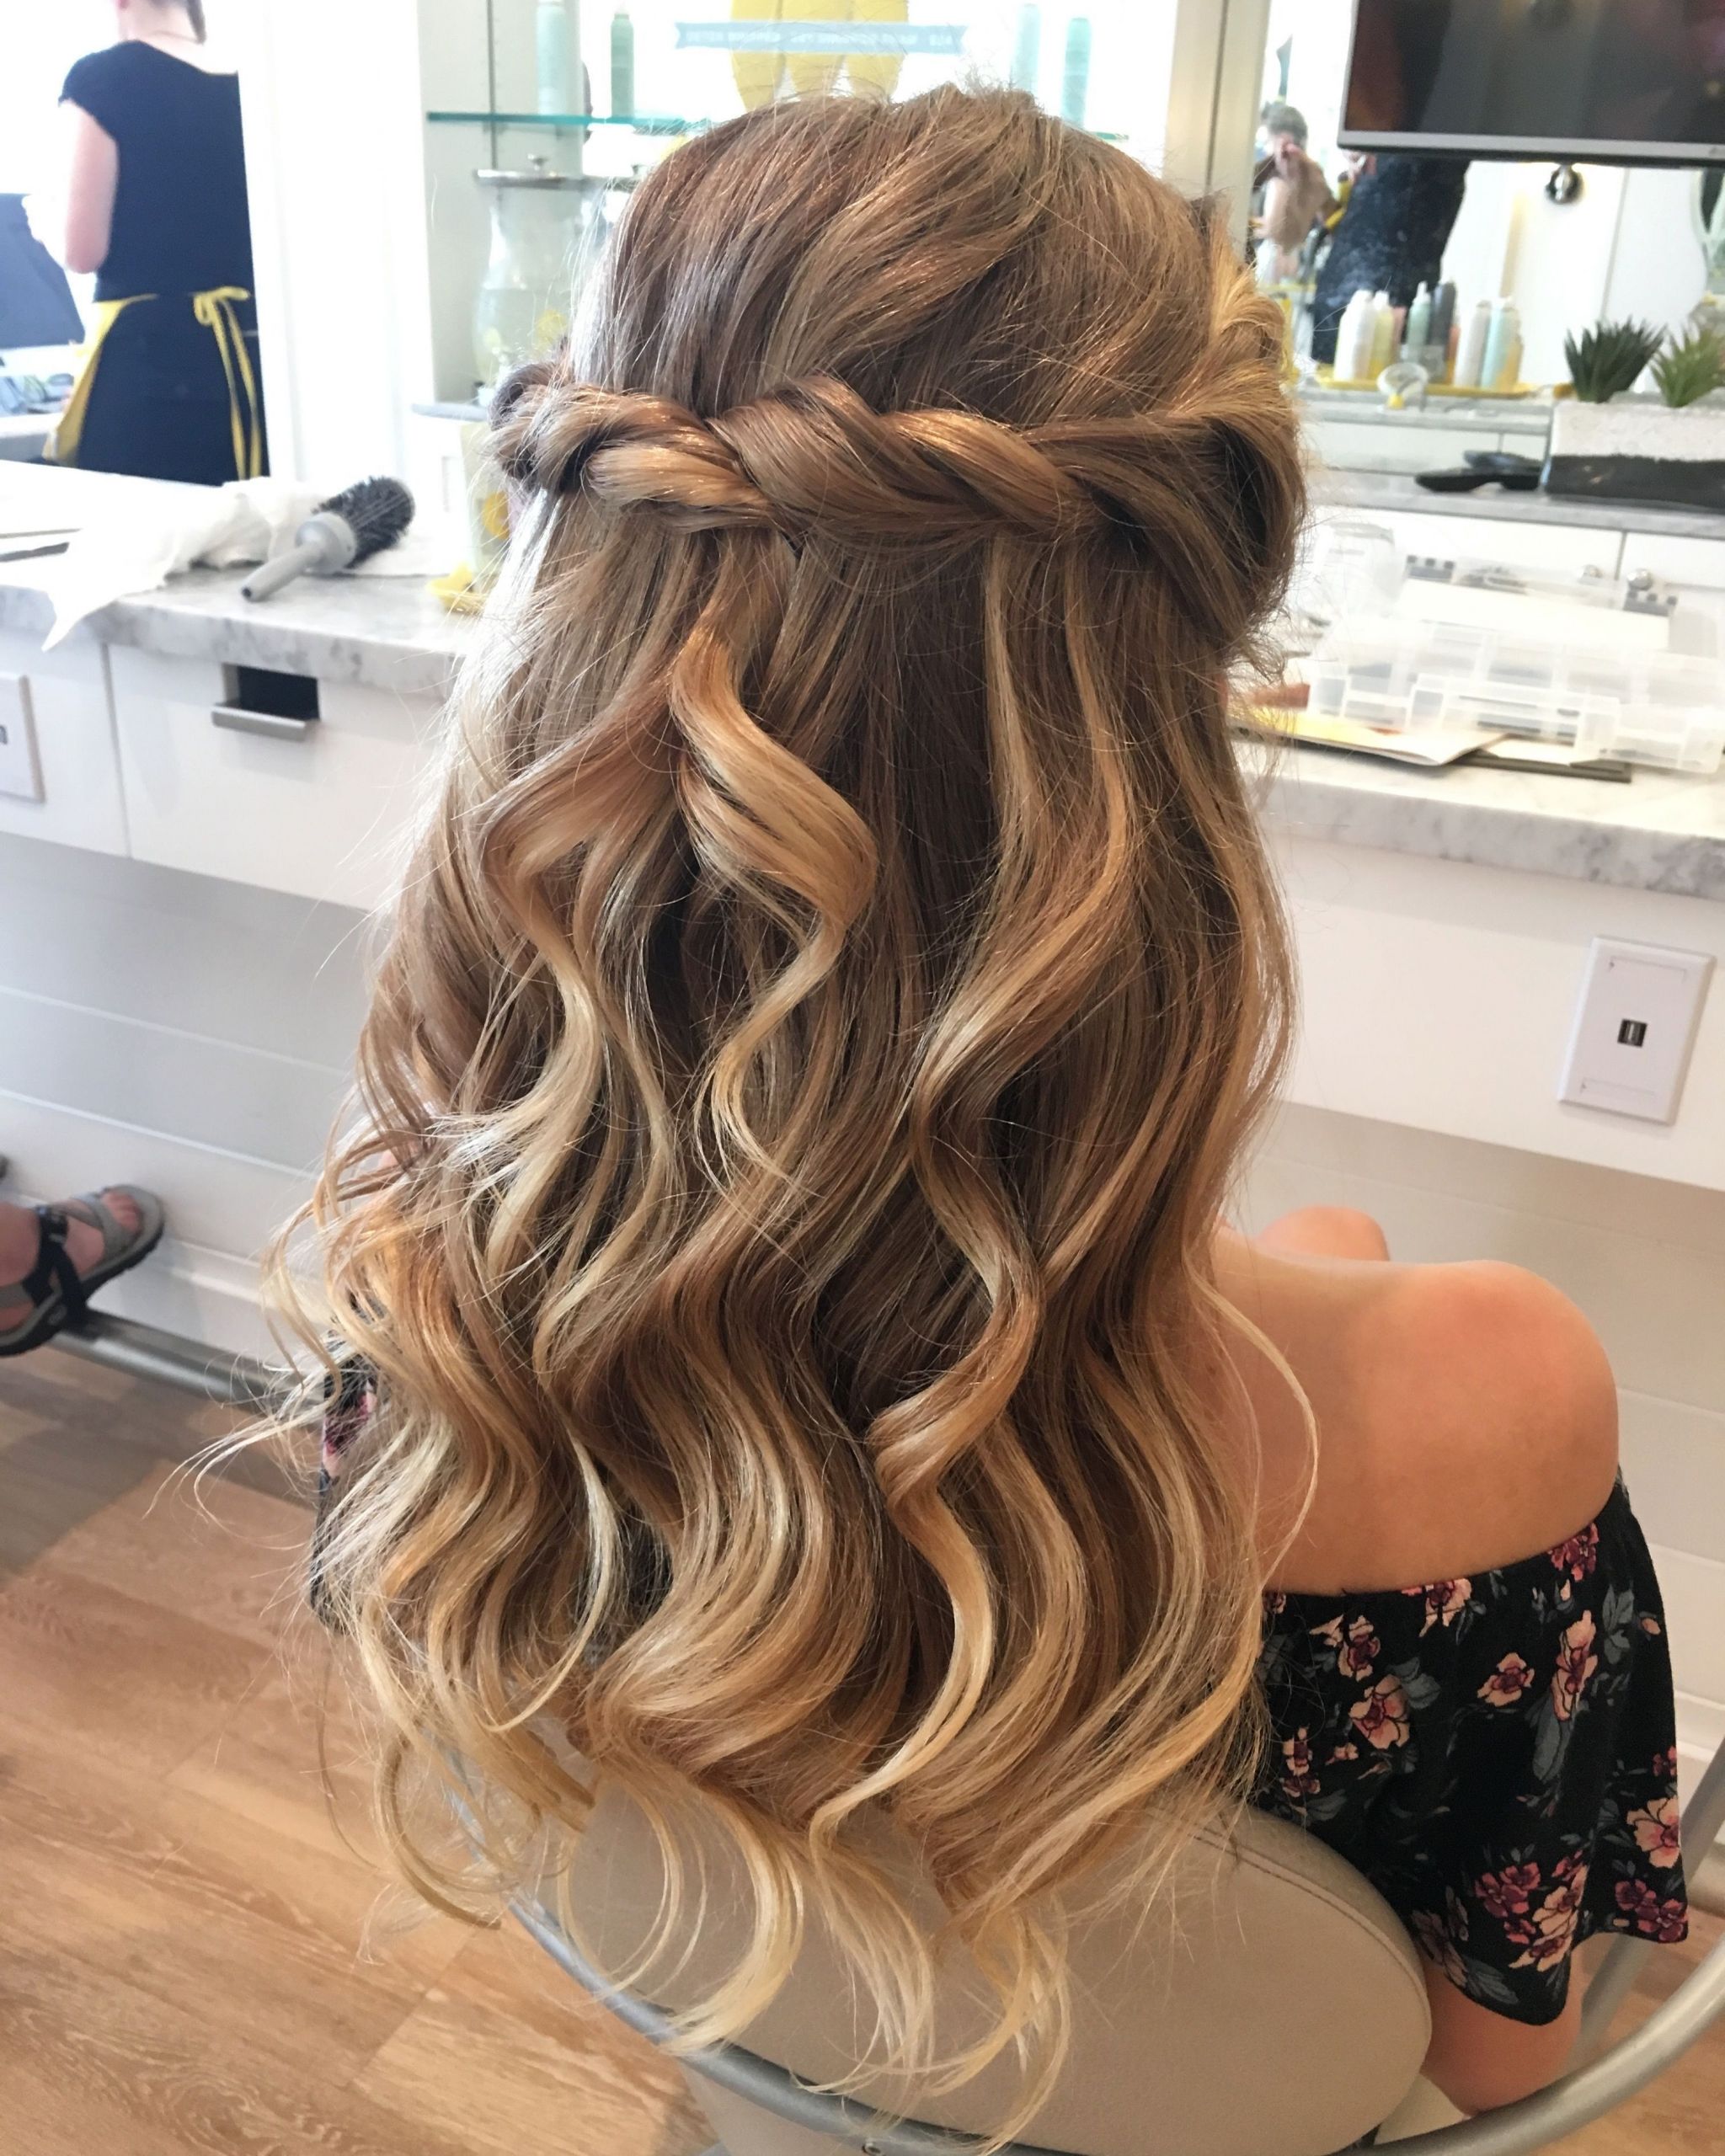 Half Up Half Down Prom Hairstyles Tutorials
 New Pic Half up half down hair prom Thoughts